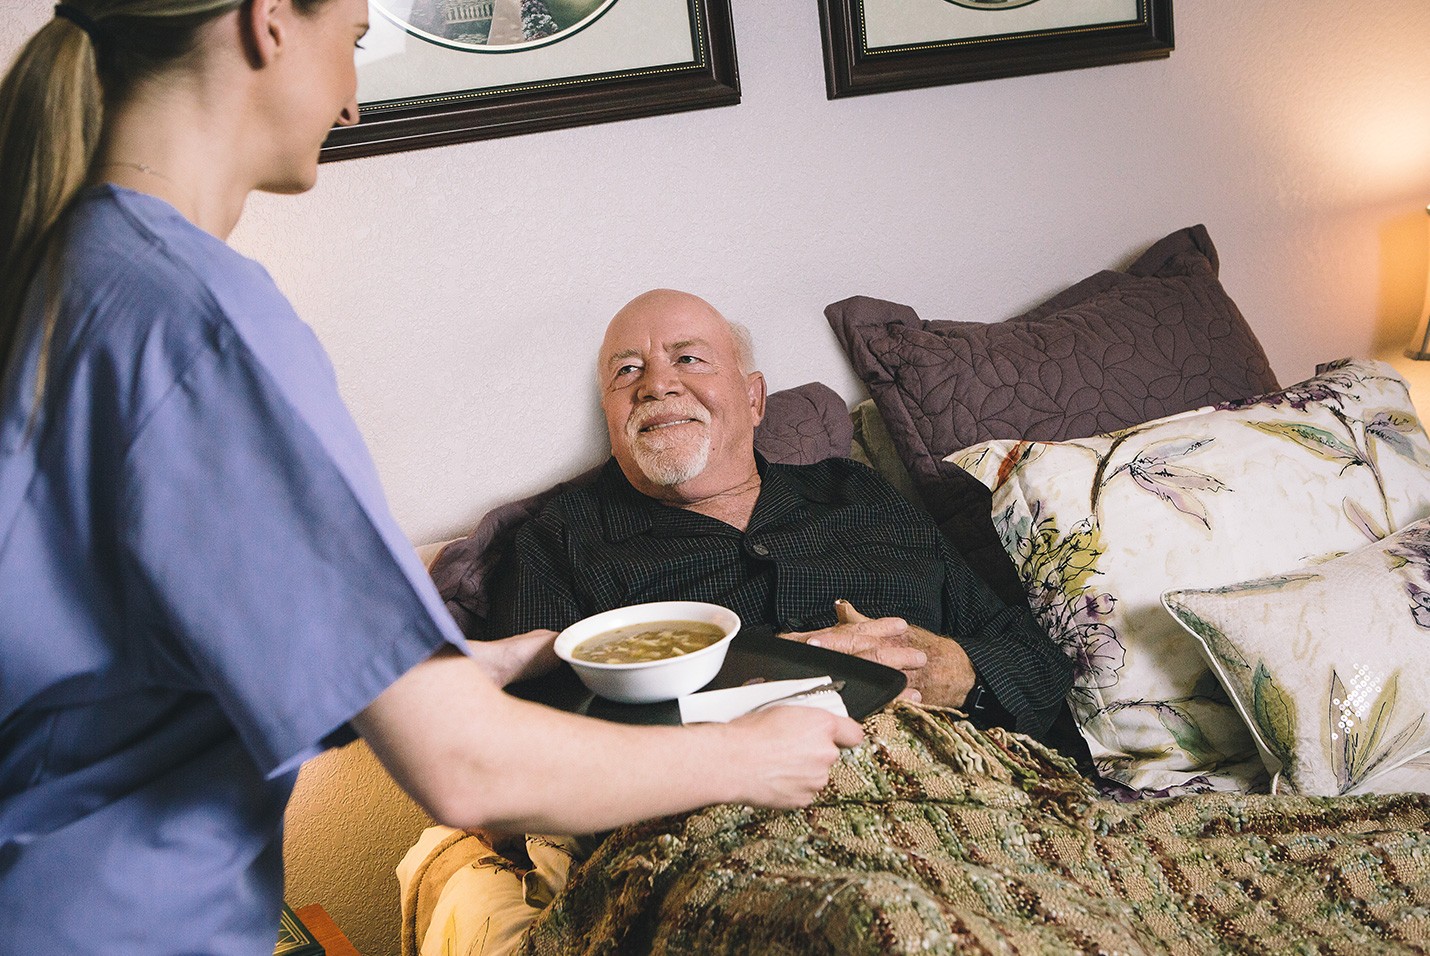 Benefits of In-Home Care for Seniors with Alzheimer’s Disease